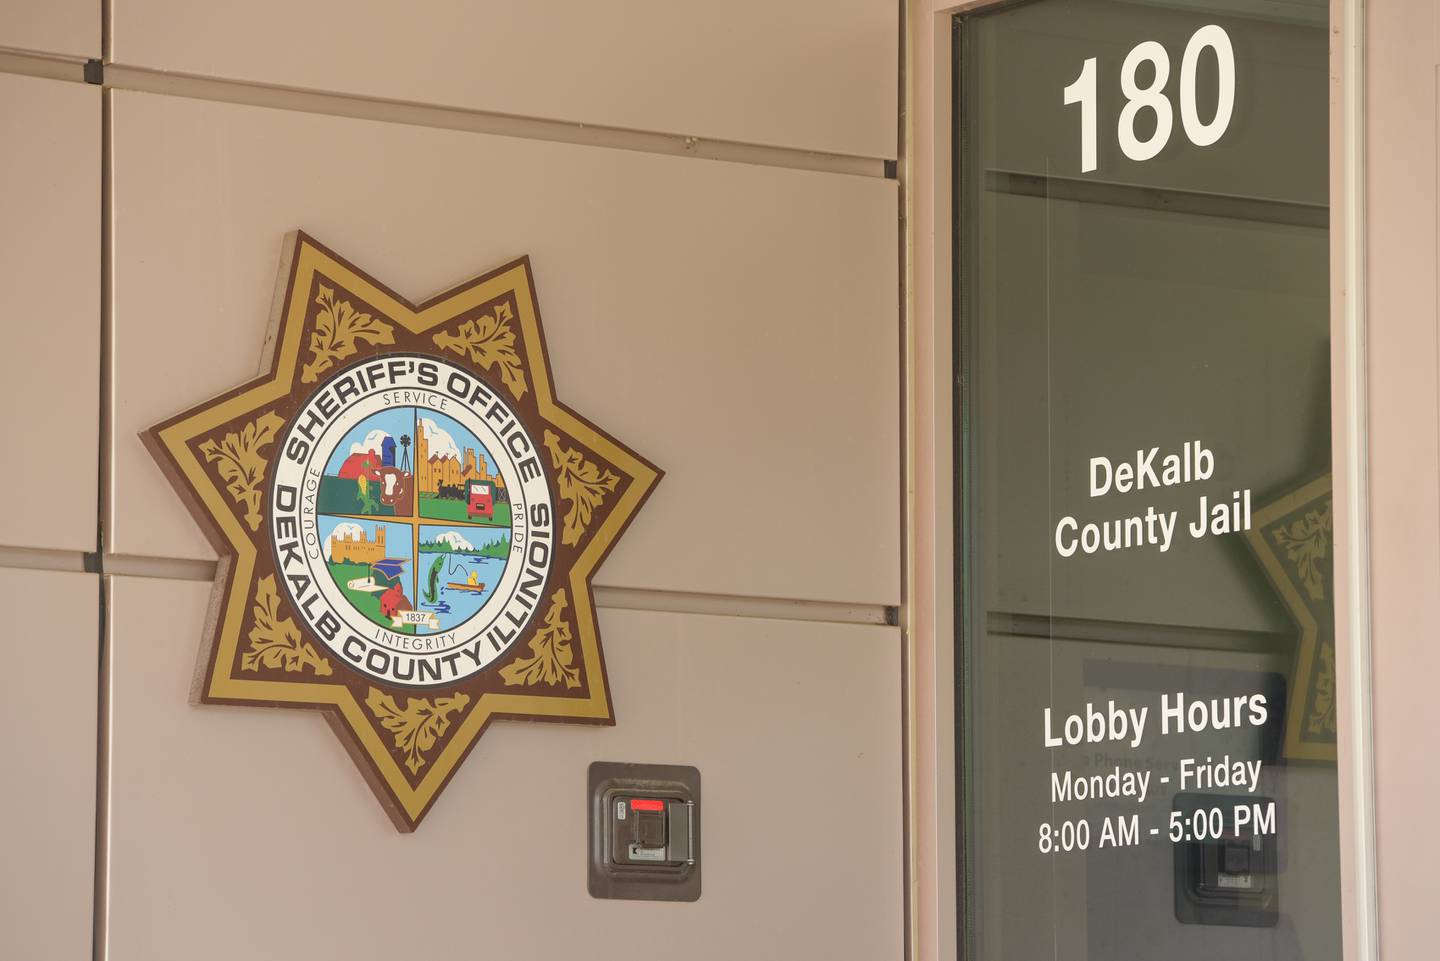 DeKalb County Jail and Sheriff's Office building sign and emblem in Sycamore, IL on Thursday, May 13, 2021.